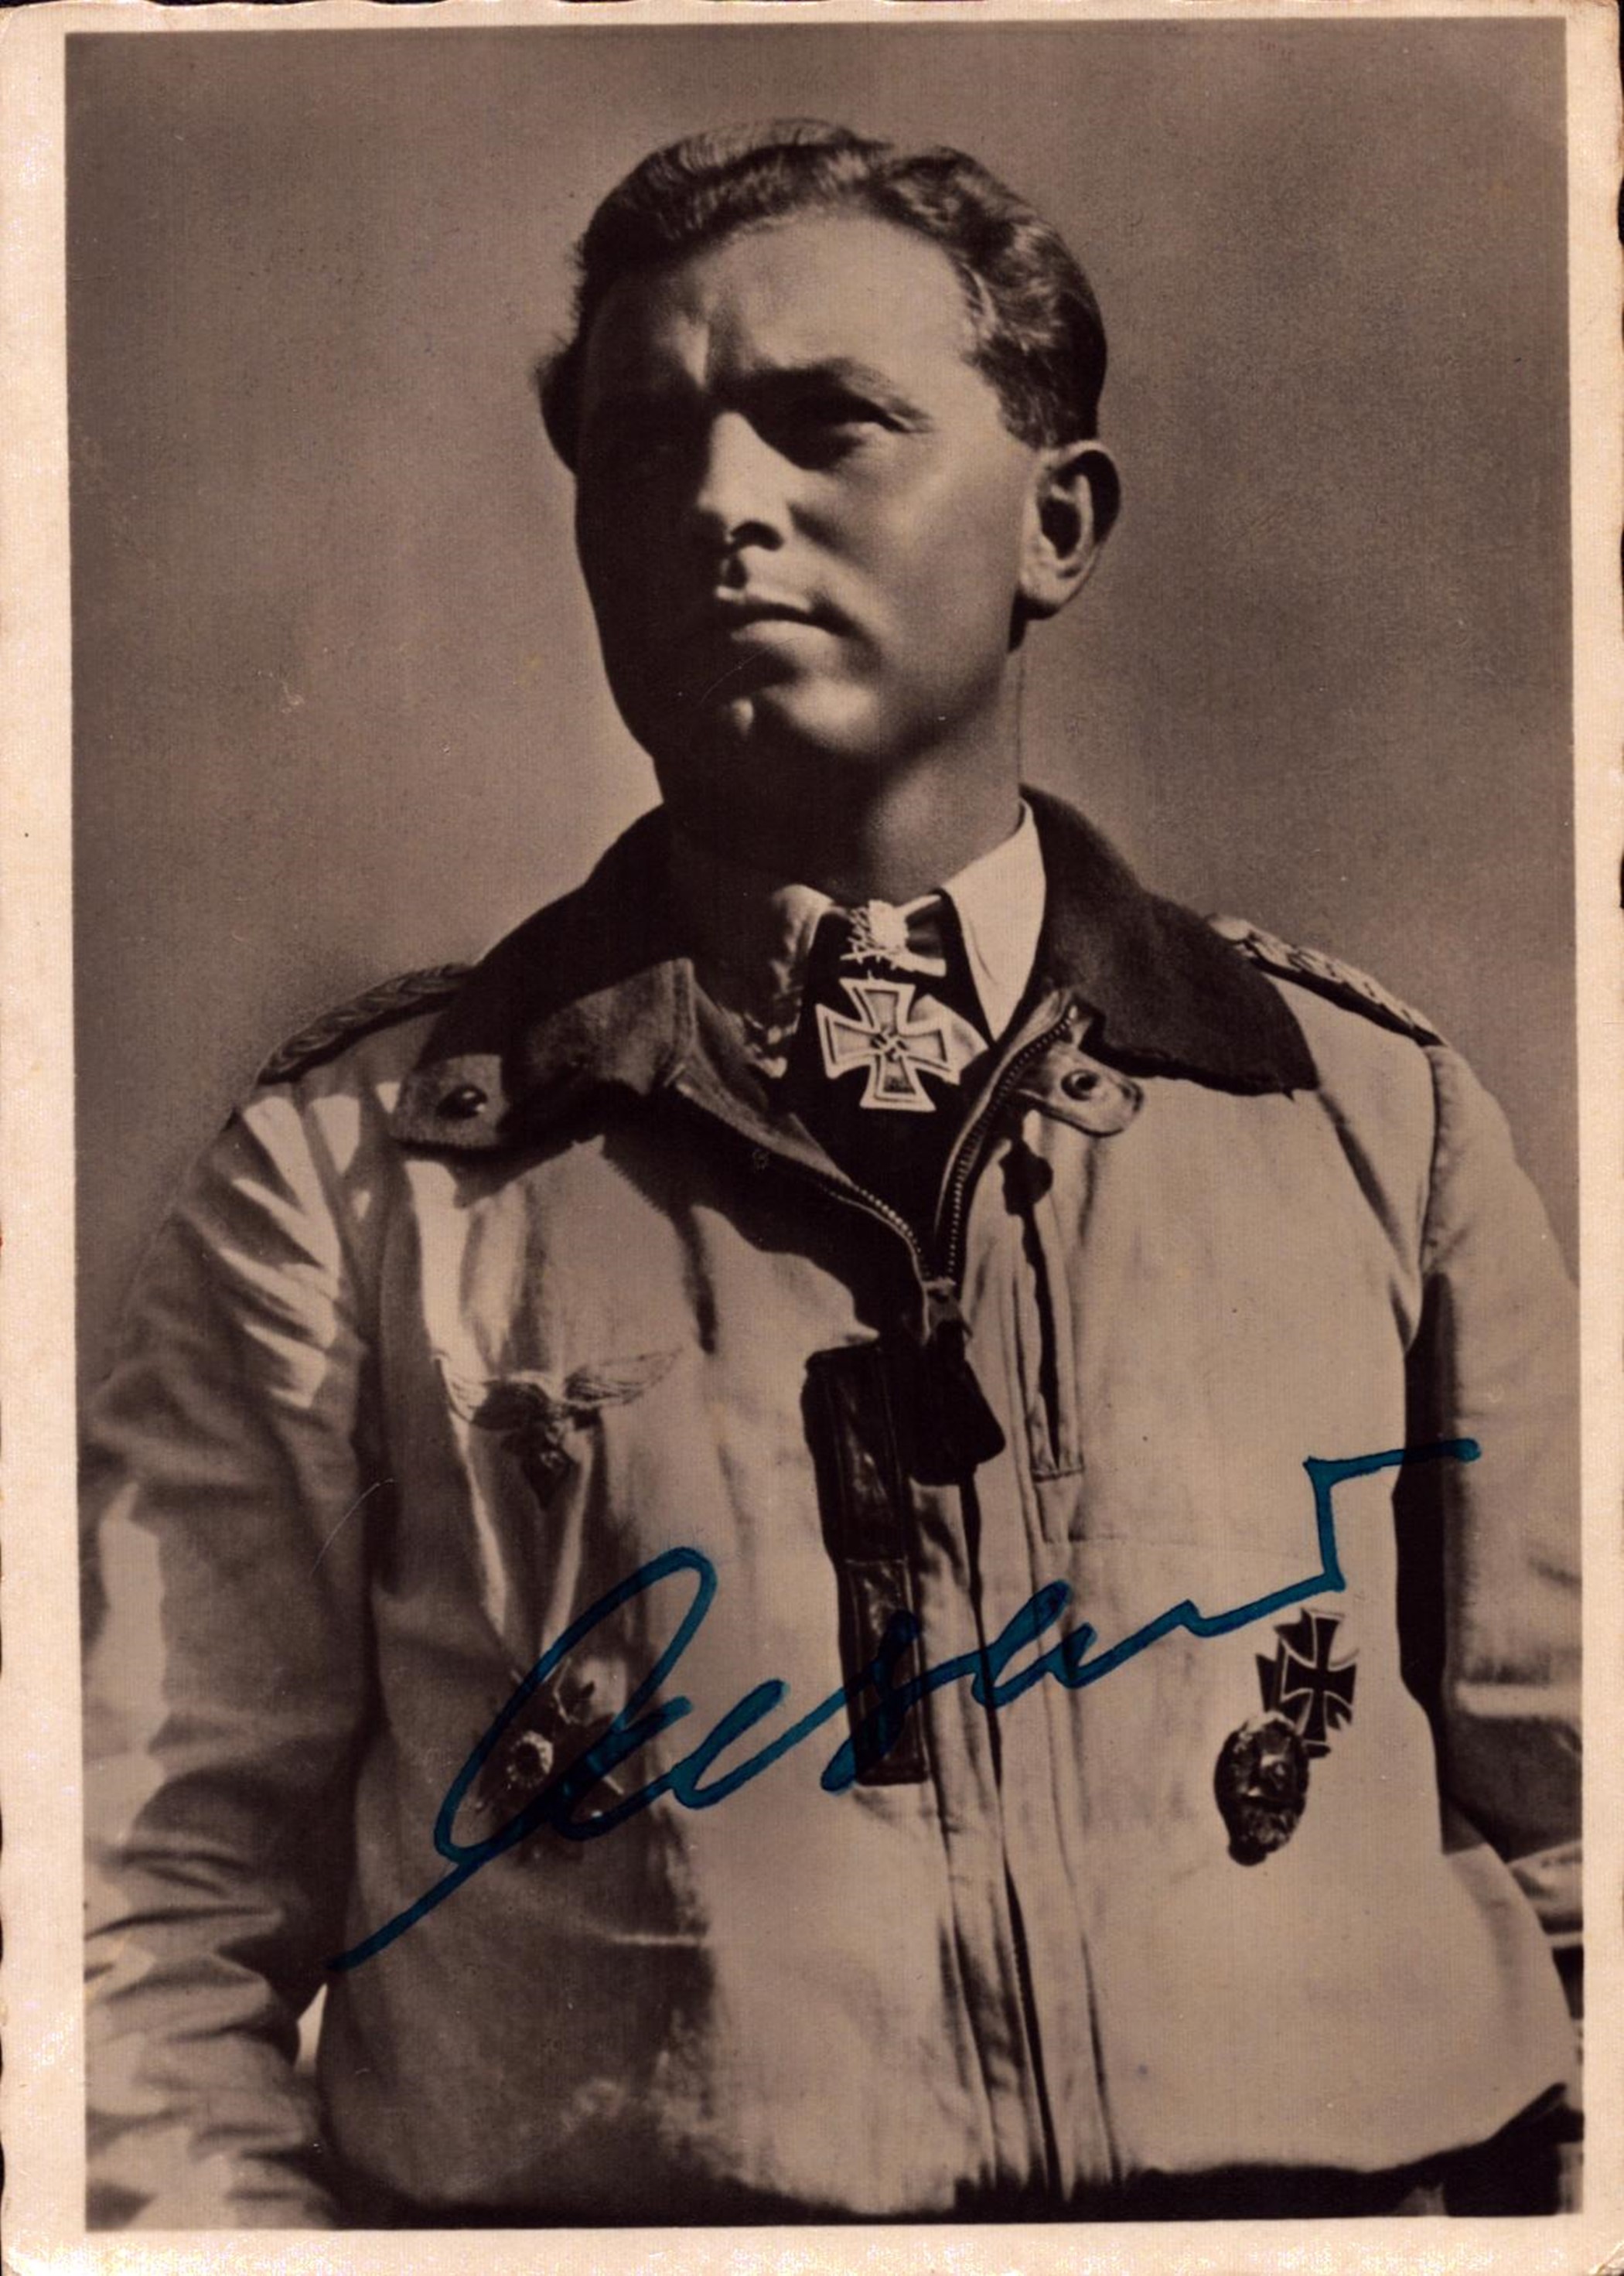 Luftwaffe Ace Walter Oesau signed 6x4 inch approx sepia photo. Walter "Gulle" Oesau (28 June - Image 3 of 3